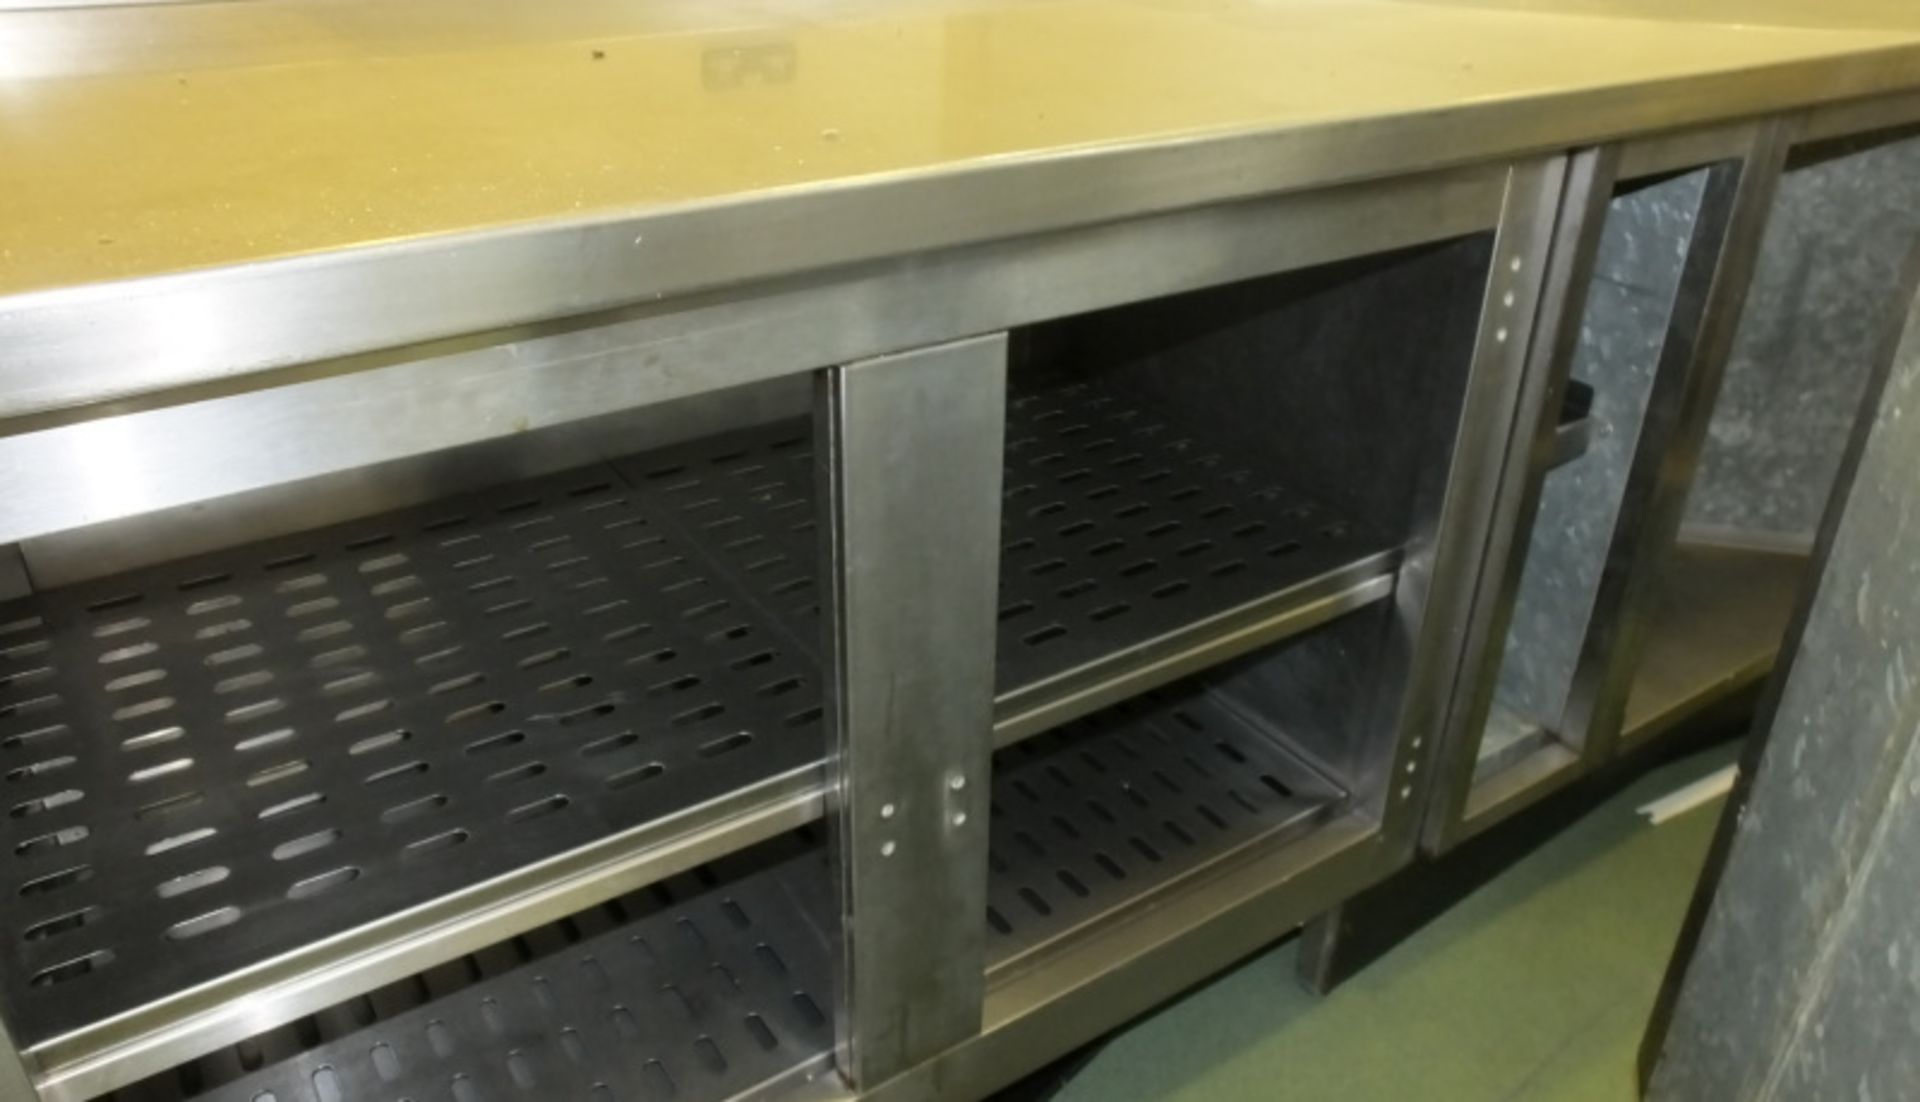 Bespoke Stainless Steel Preparation Unit with Storage - details and dimensions in description - Image 5 of 5